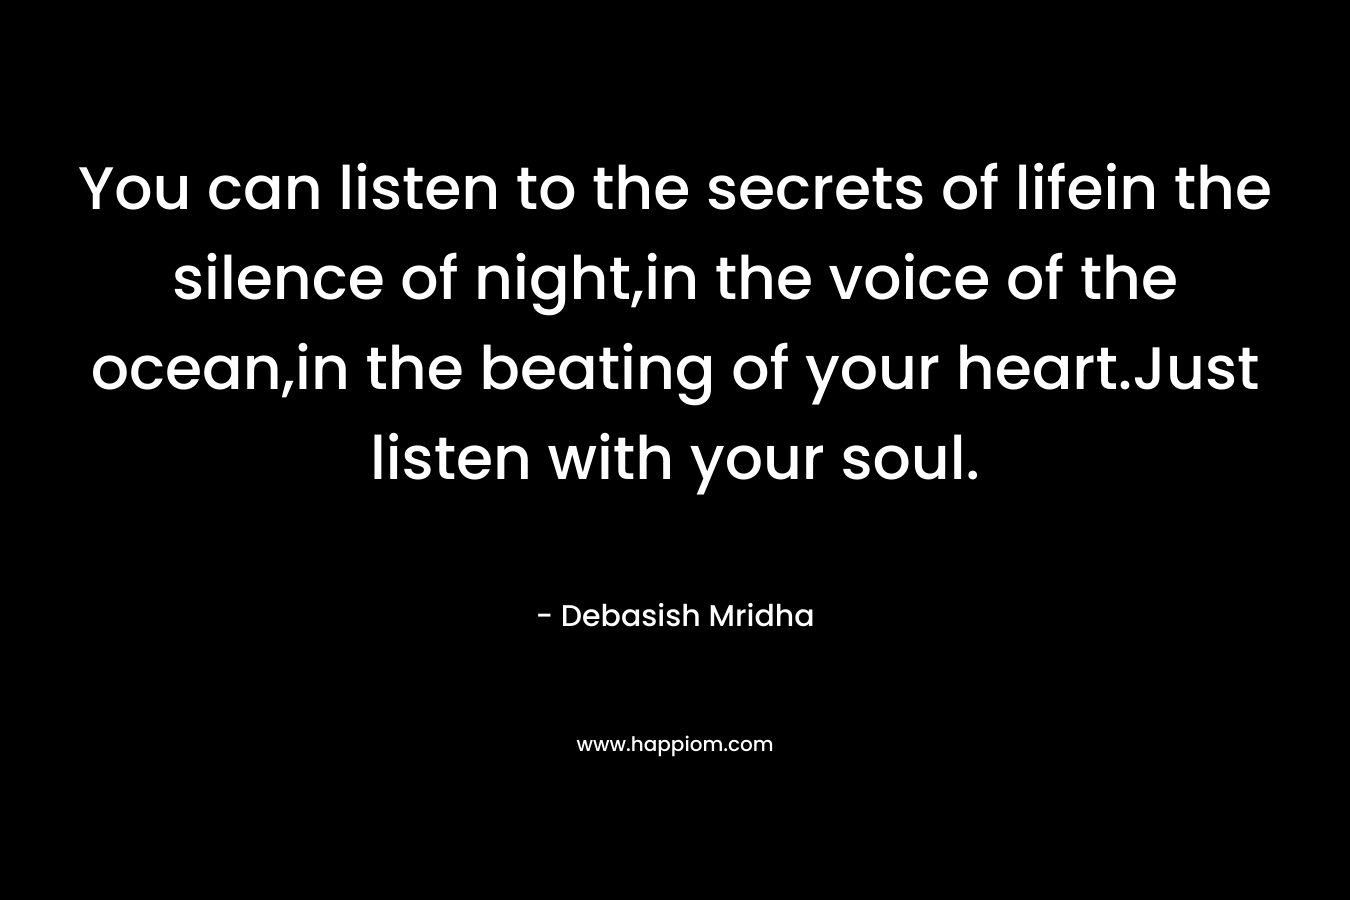 You can listen to the secrets of lifein the silence of night,in the voice of the ocean,in the beating of your heart.Just listen with your soul. – Debasish Mridha